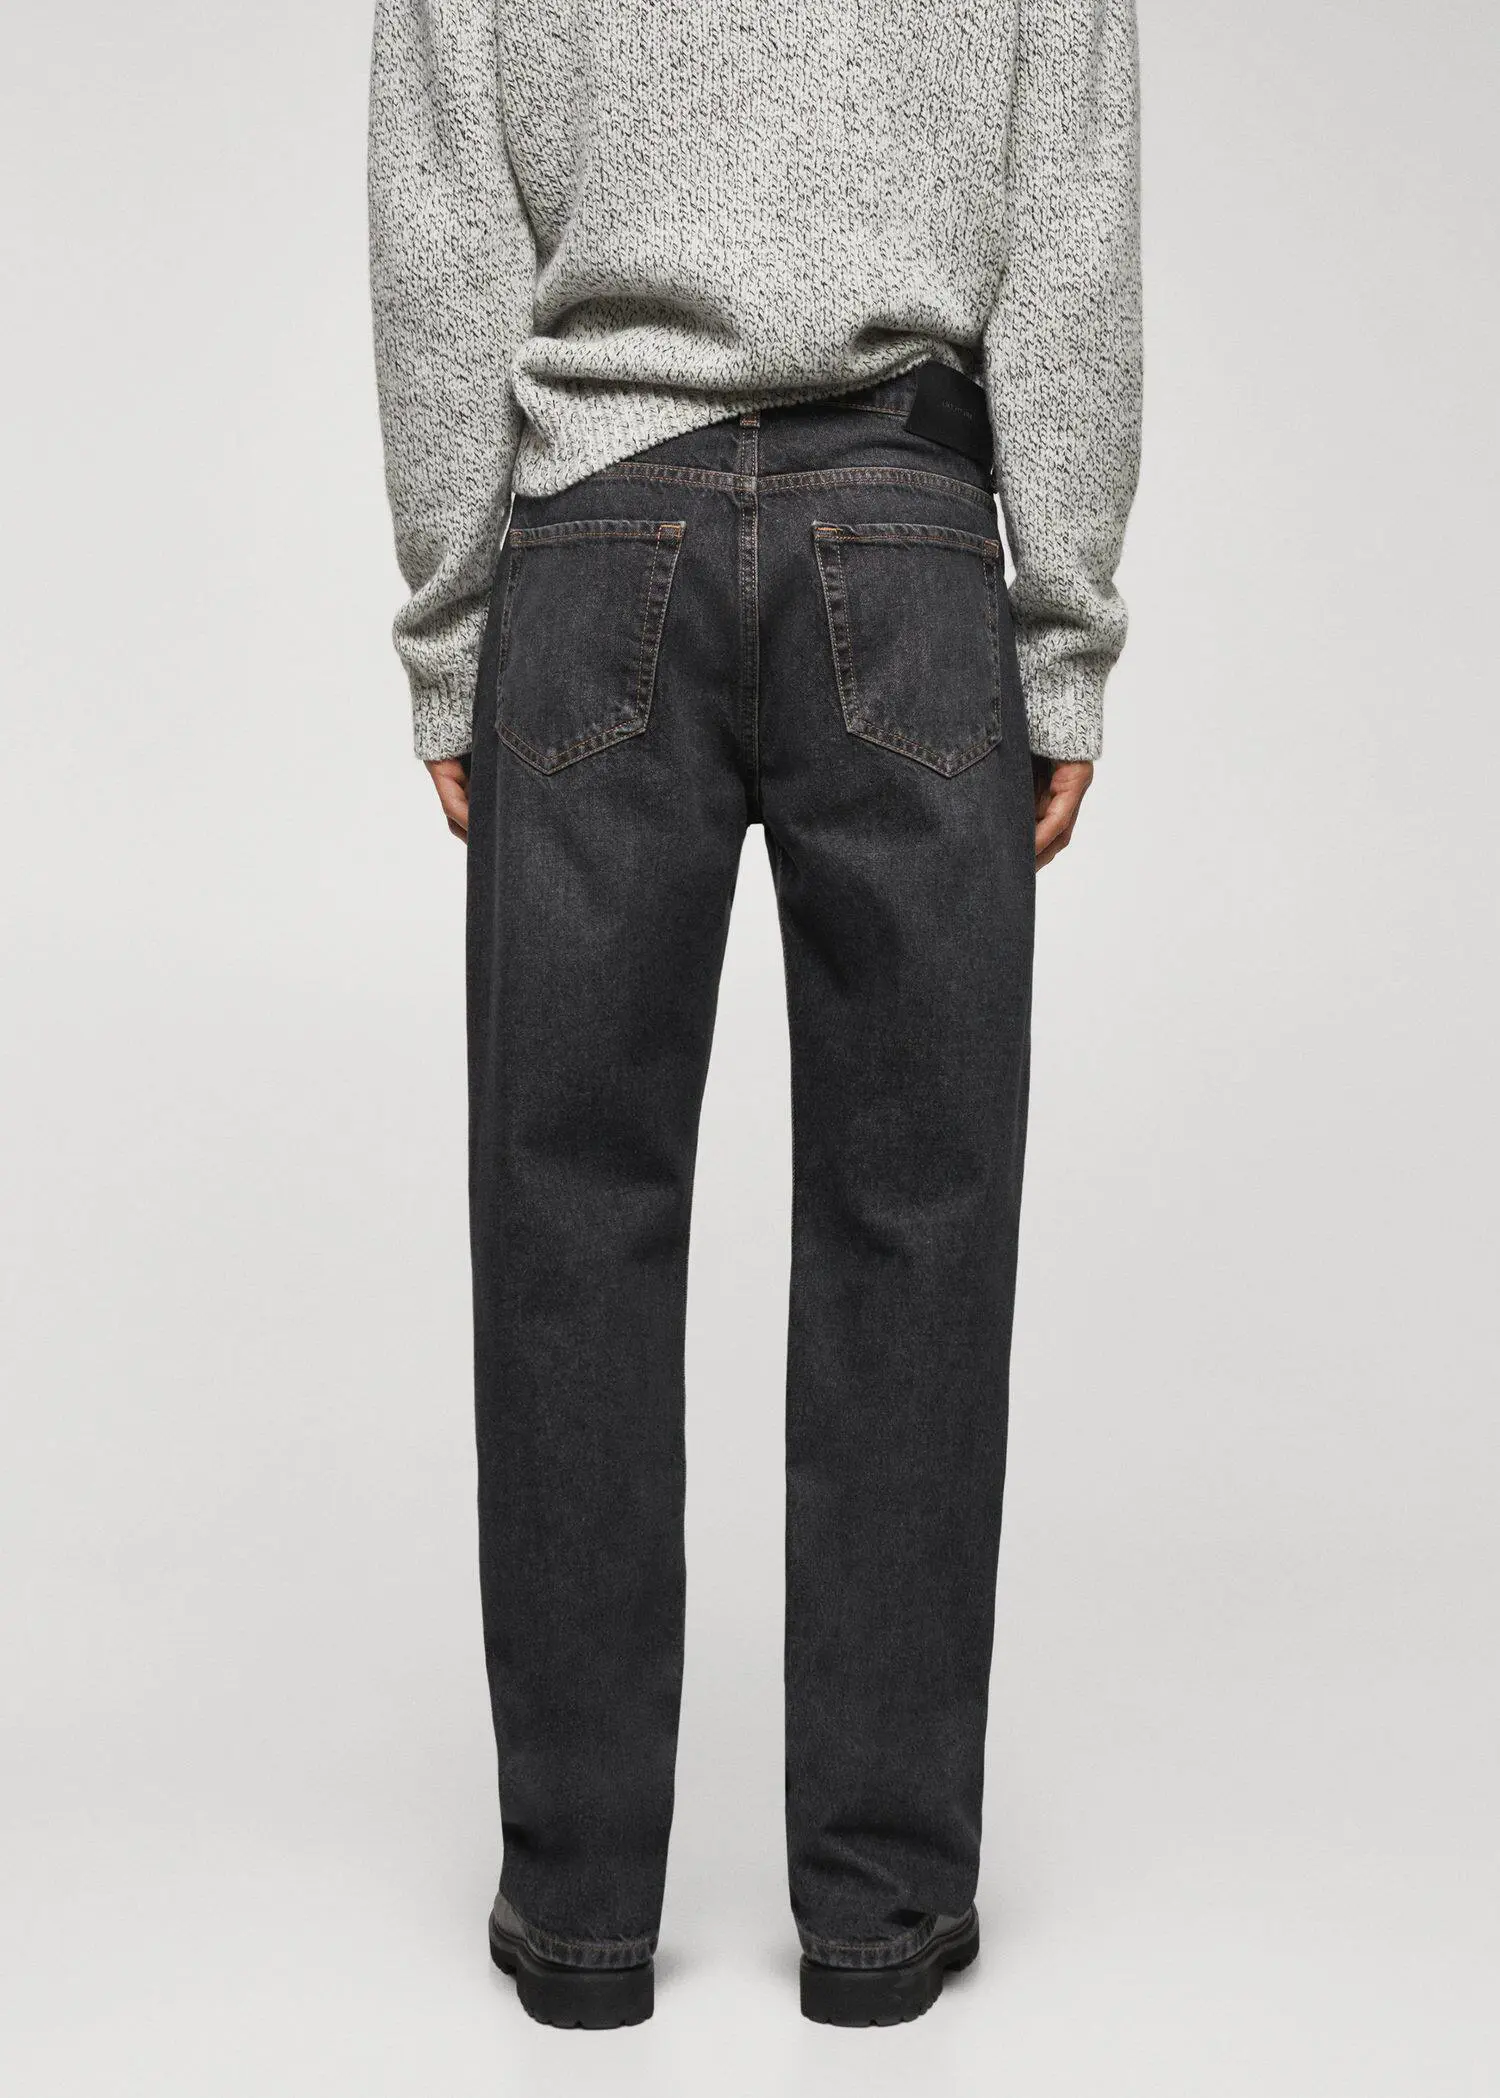 Mango Relaxed-fit dark wash jeans. 3